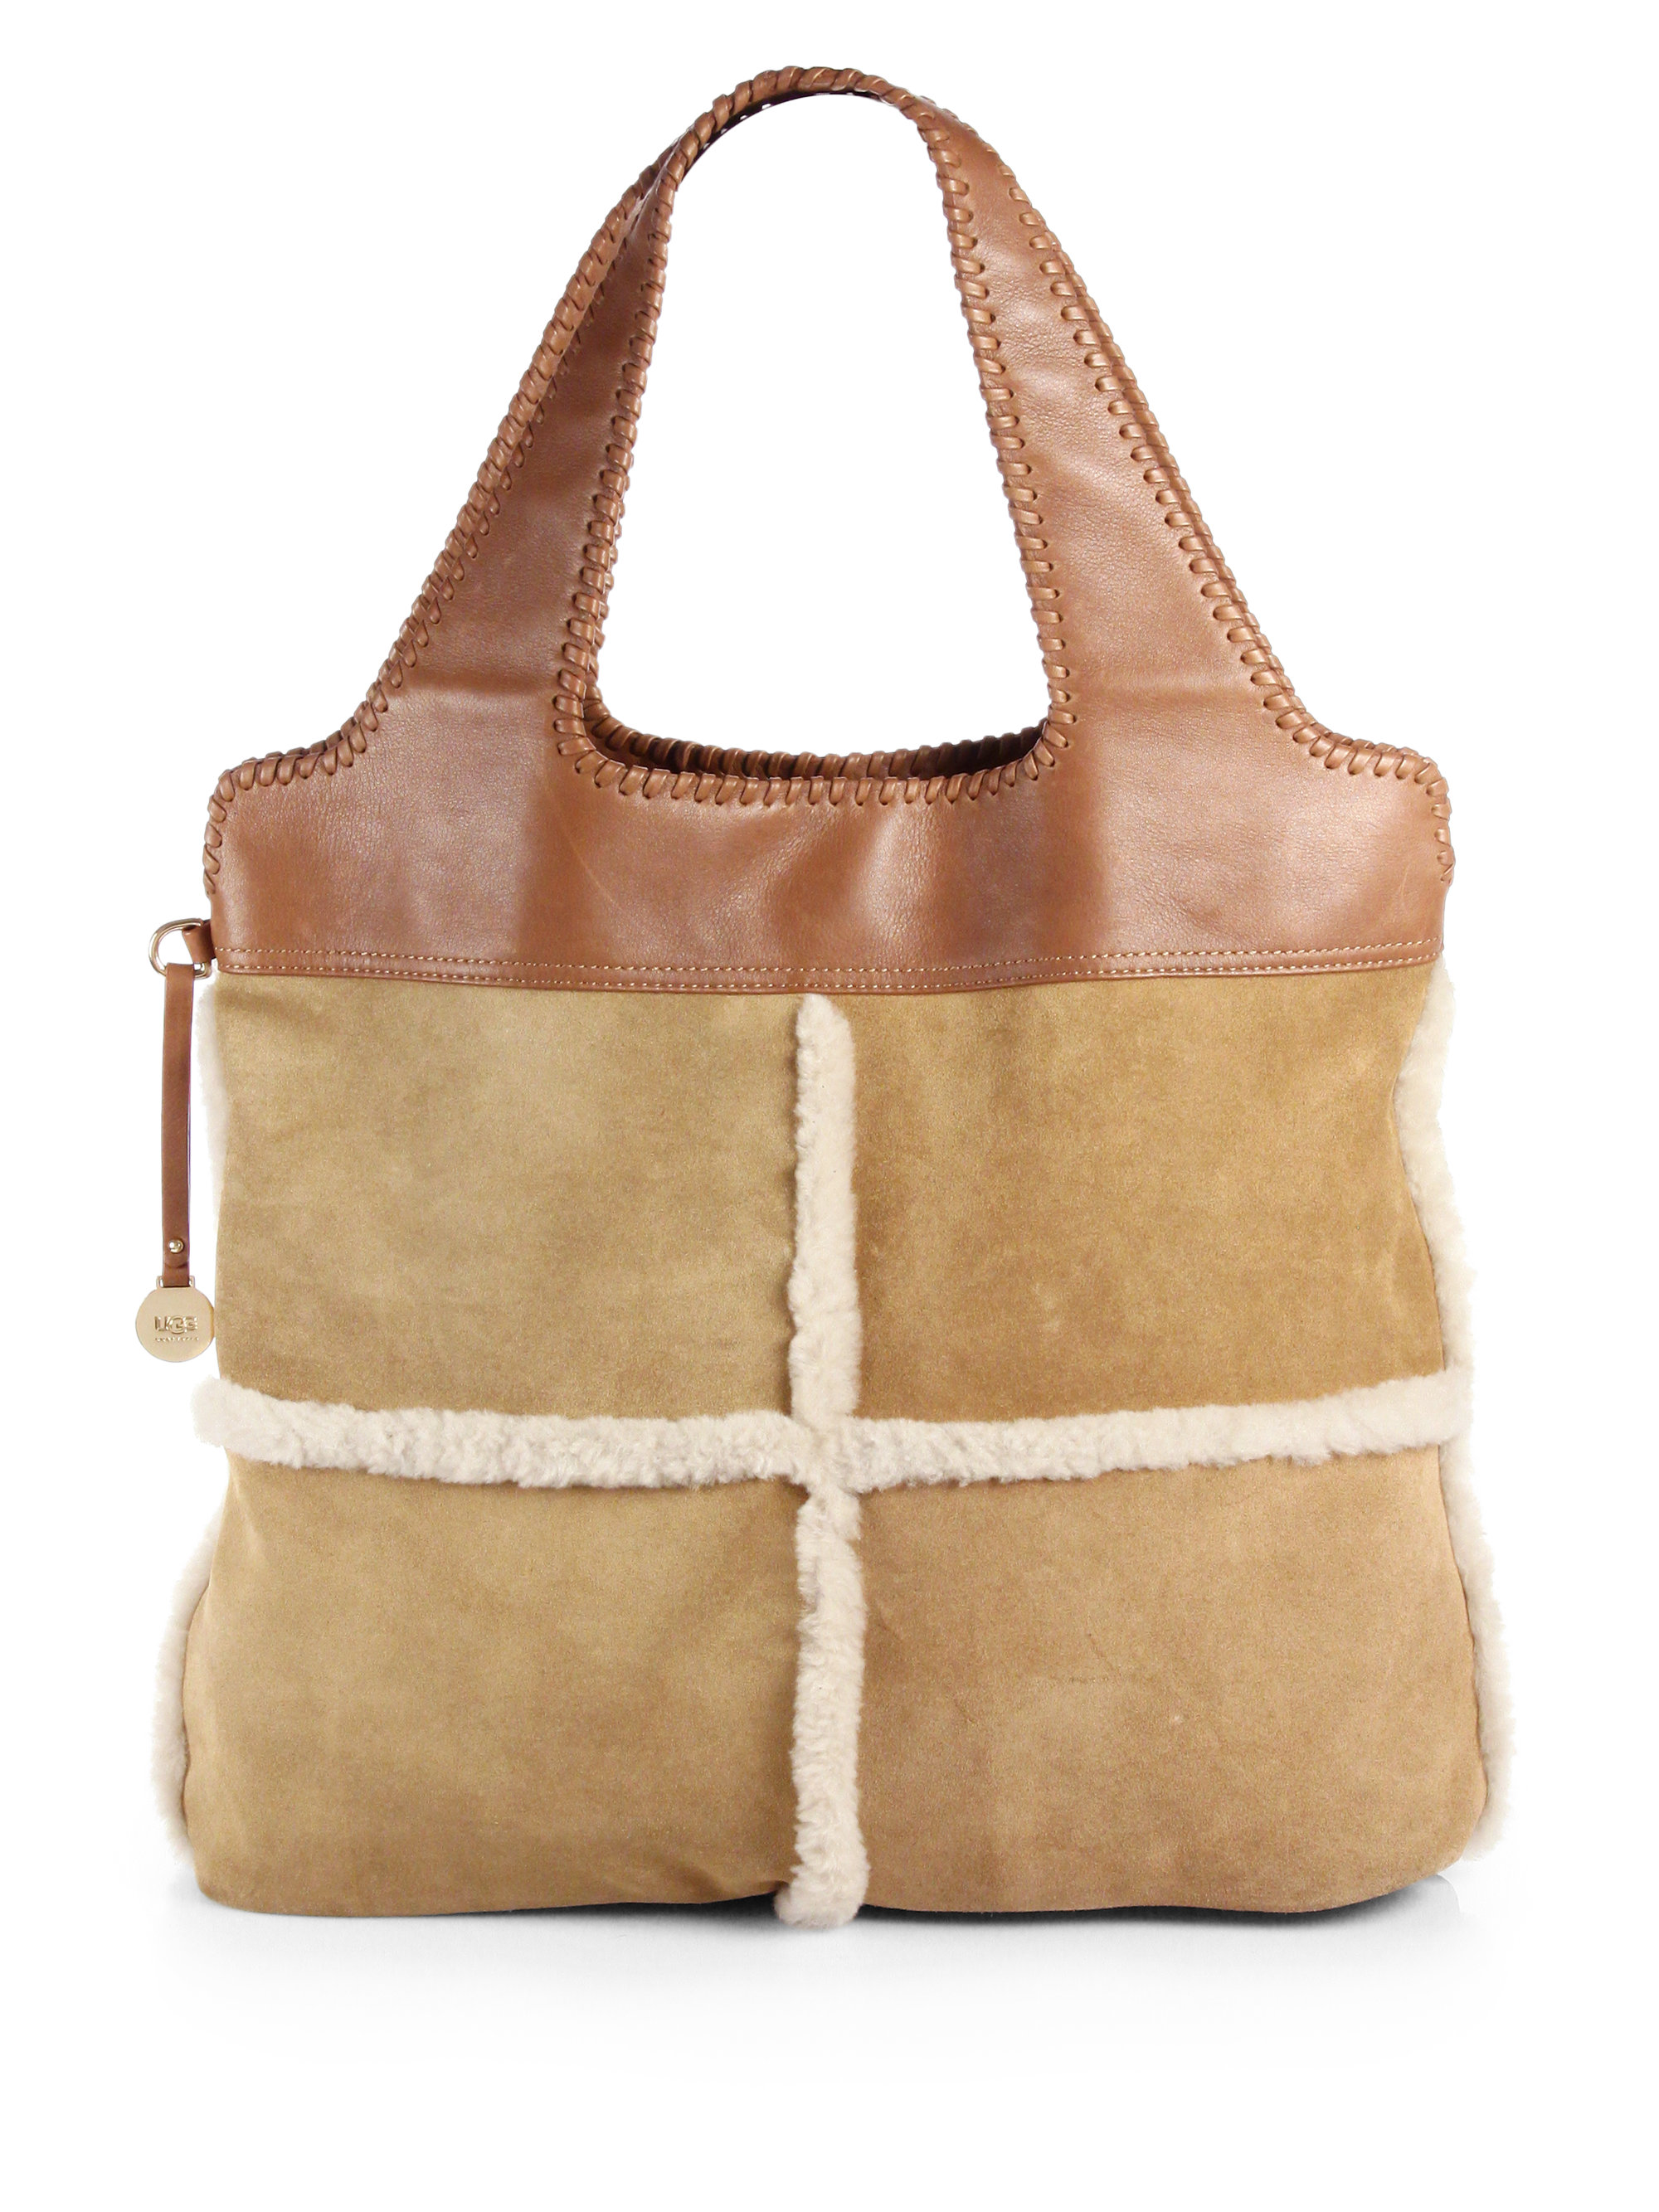 Ugg Quinn Suede Leather Tote in Brown (CHESTNUT) | Lyst